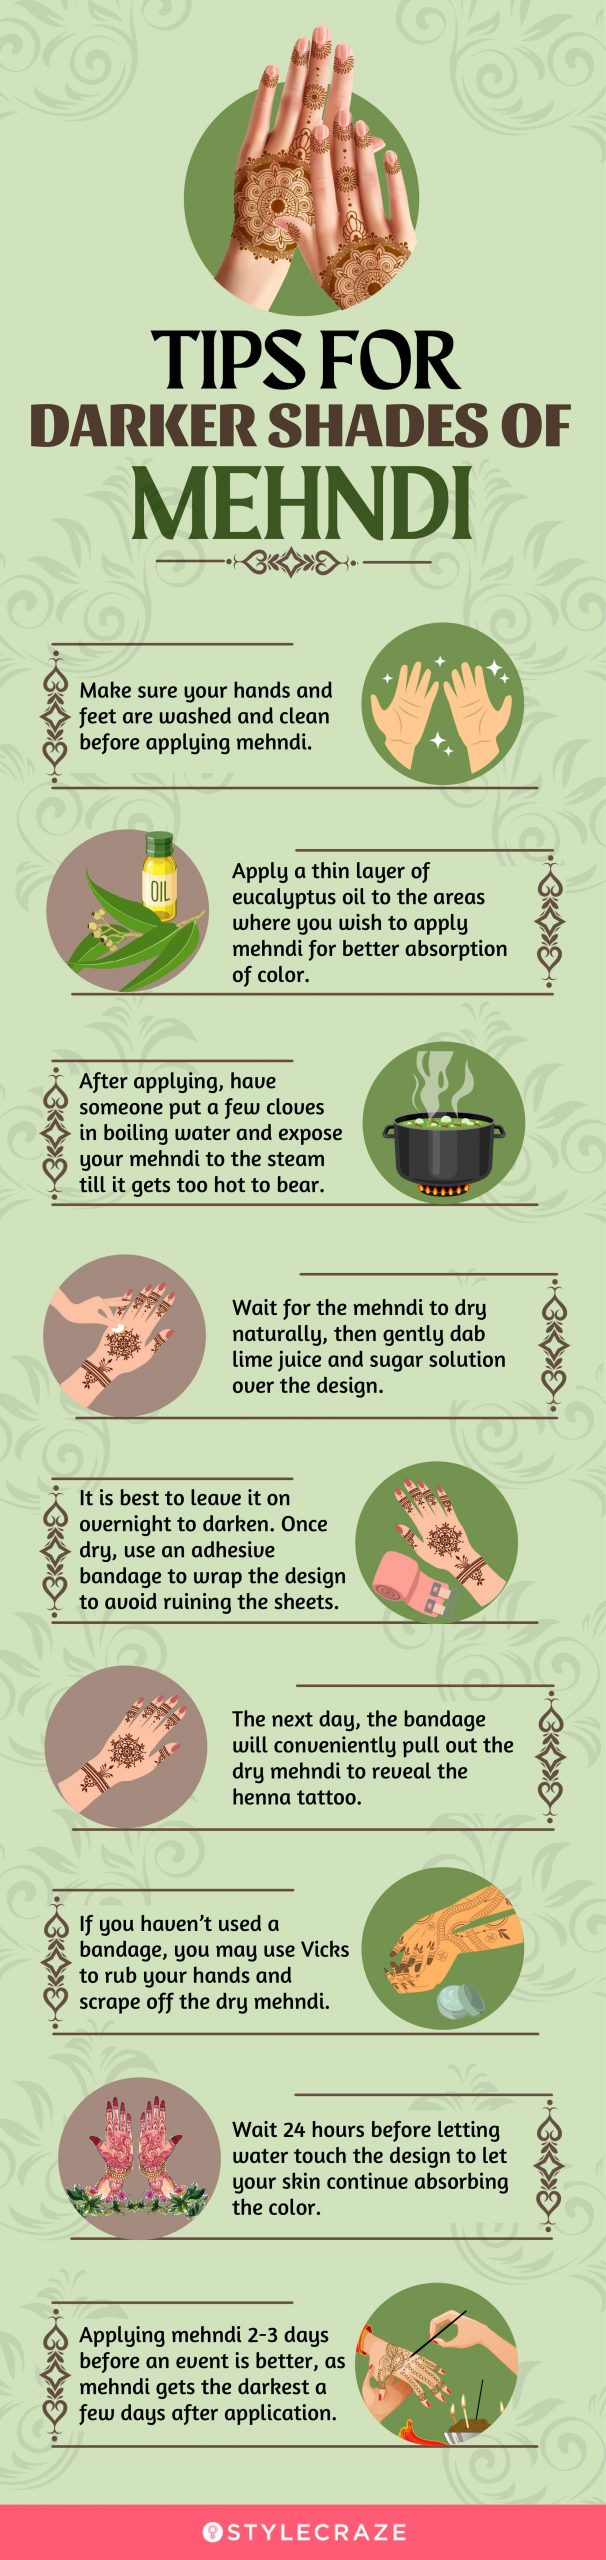 tips for darker shades of mehandi (infographic)